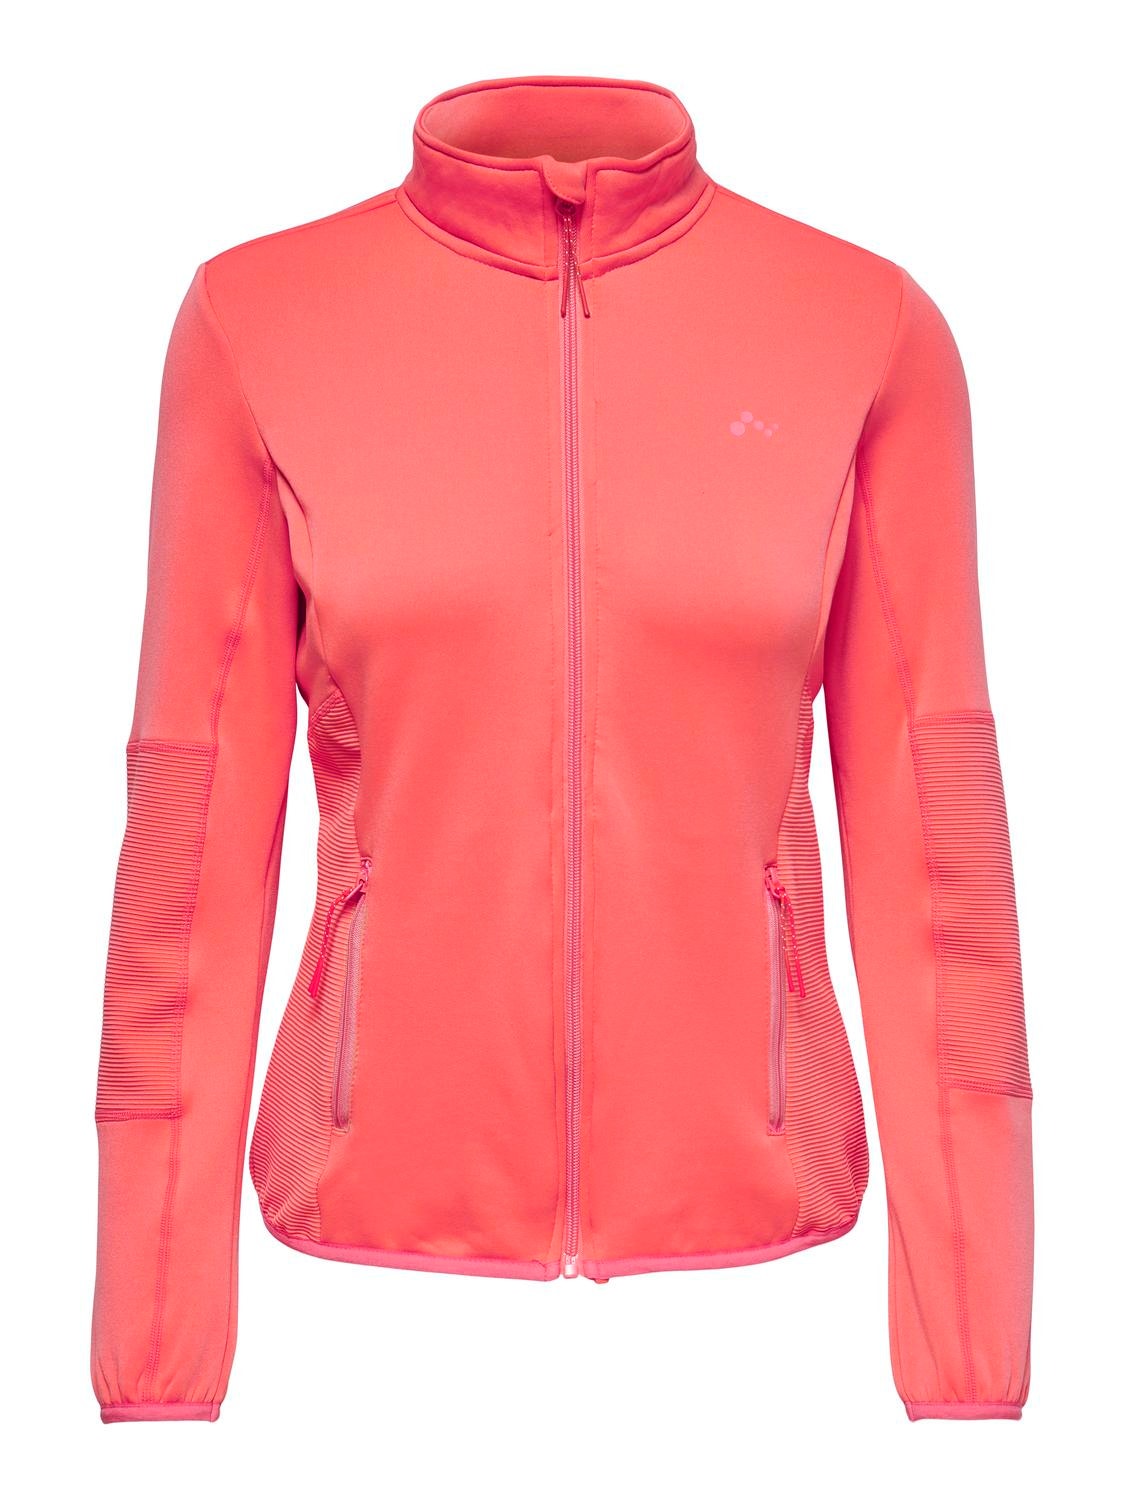 ONLY Training Fleece jacket -Spiced Coral - 15233181